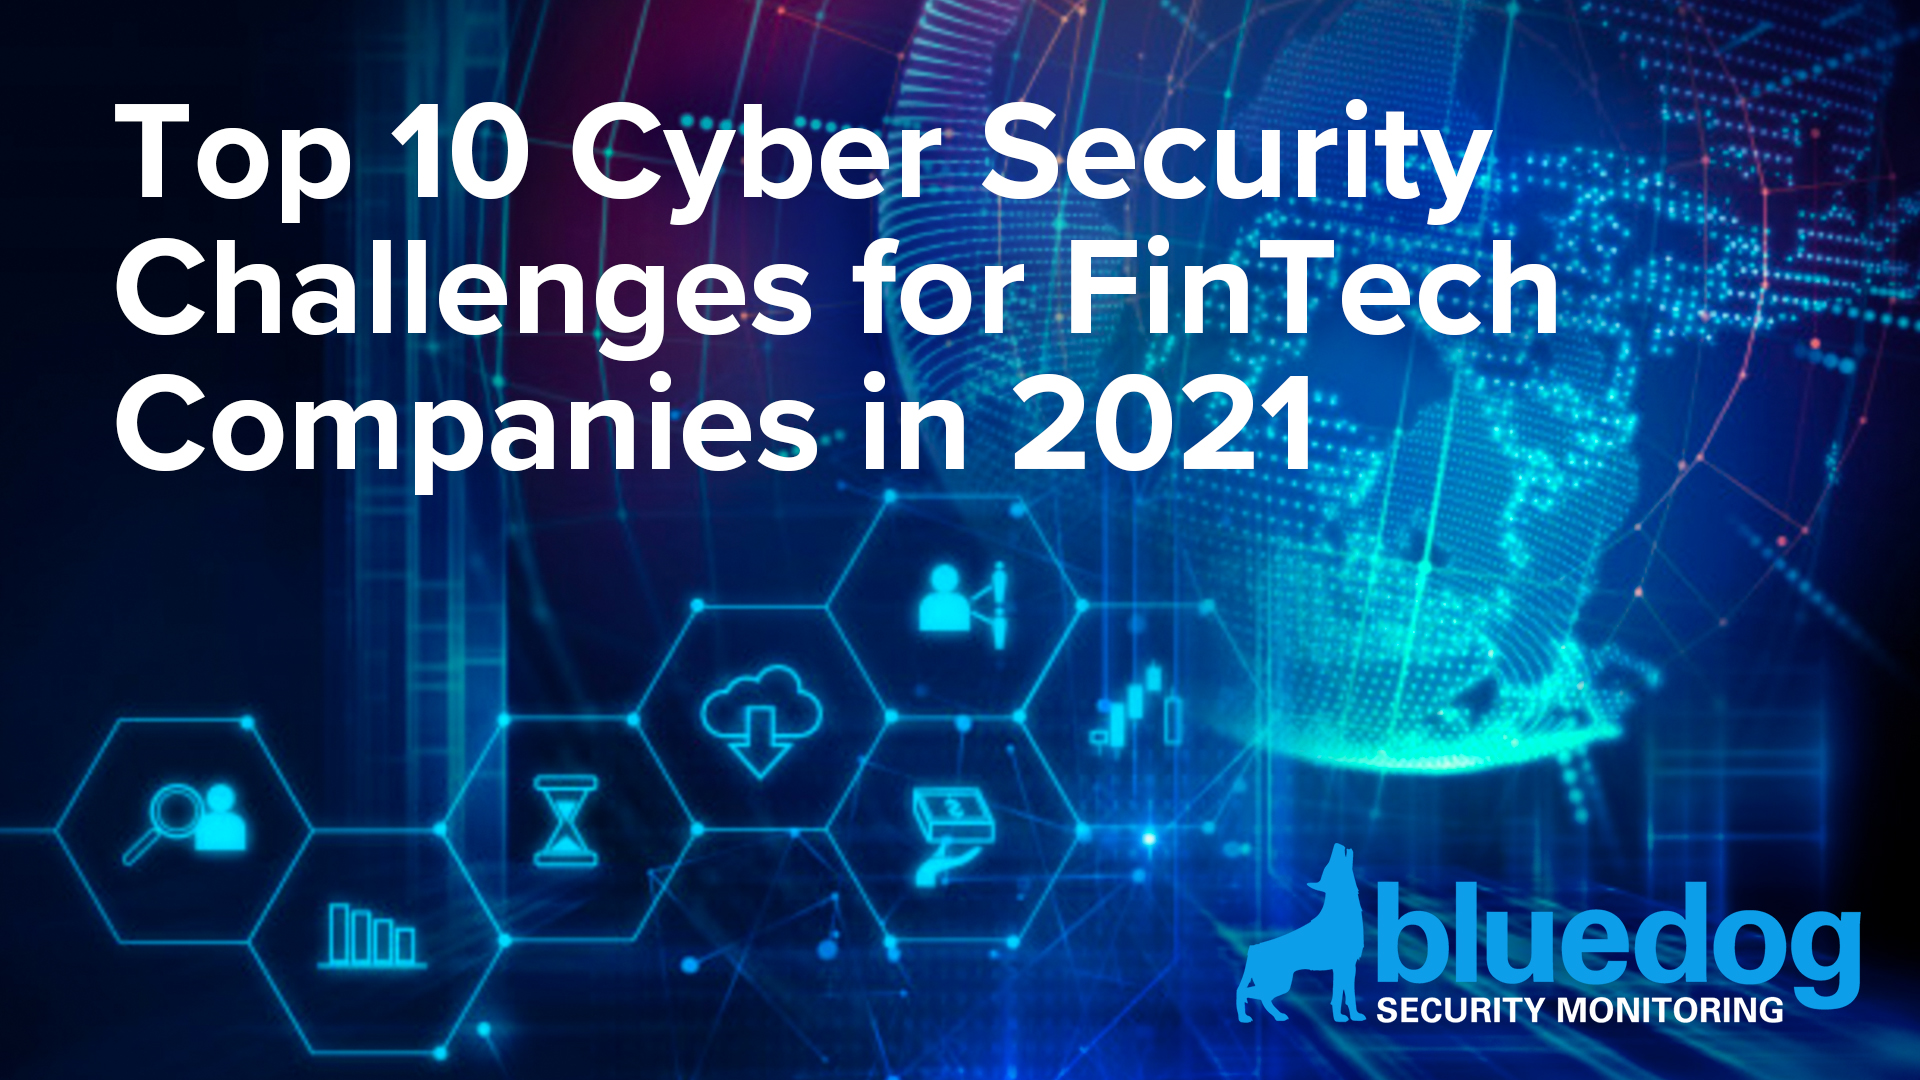 Top 10 Cyber Security Challenges for FinTech Companies in 2021